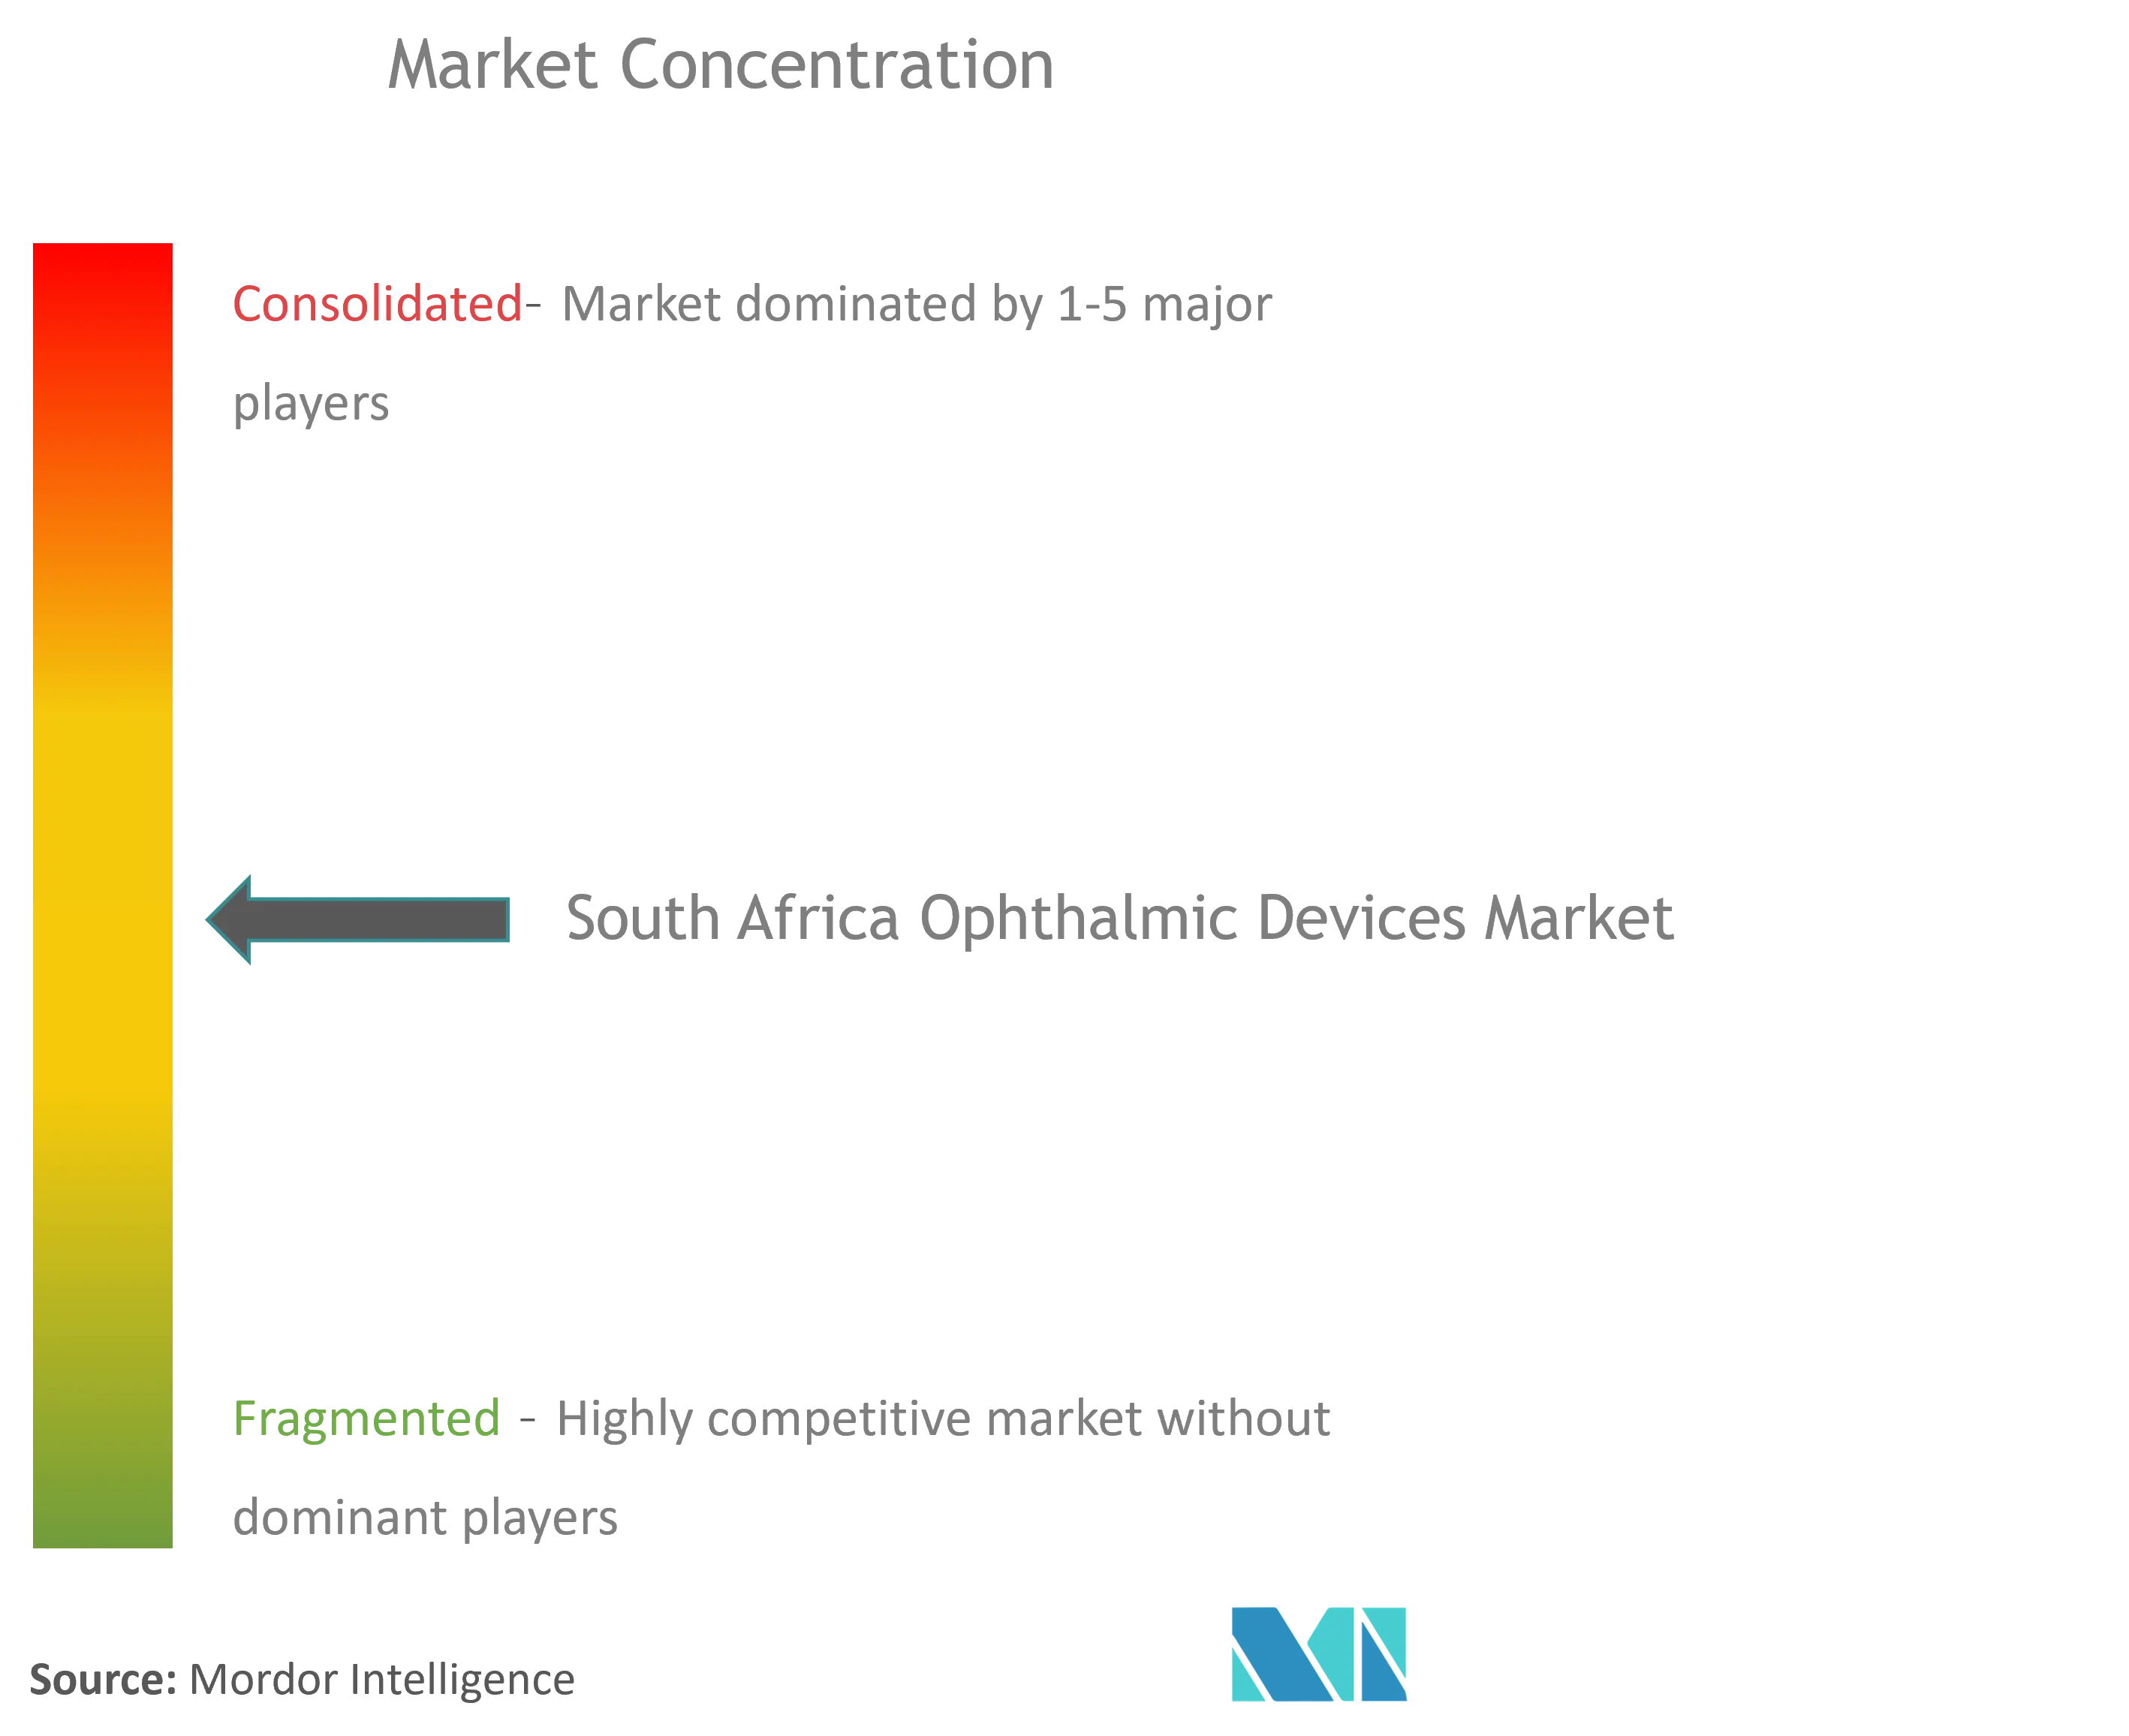 South Africa Ophthalmic Devices Market Concentration